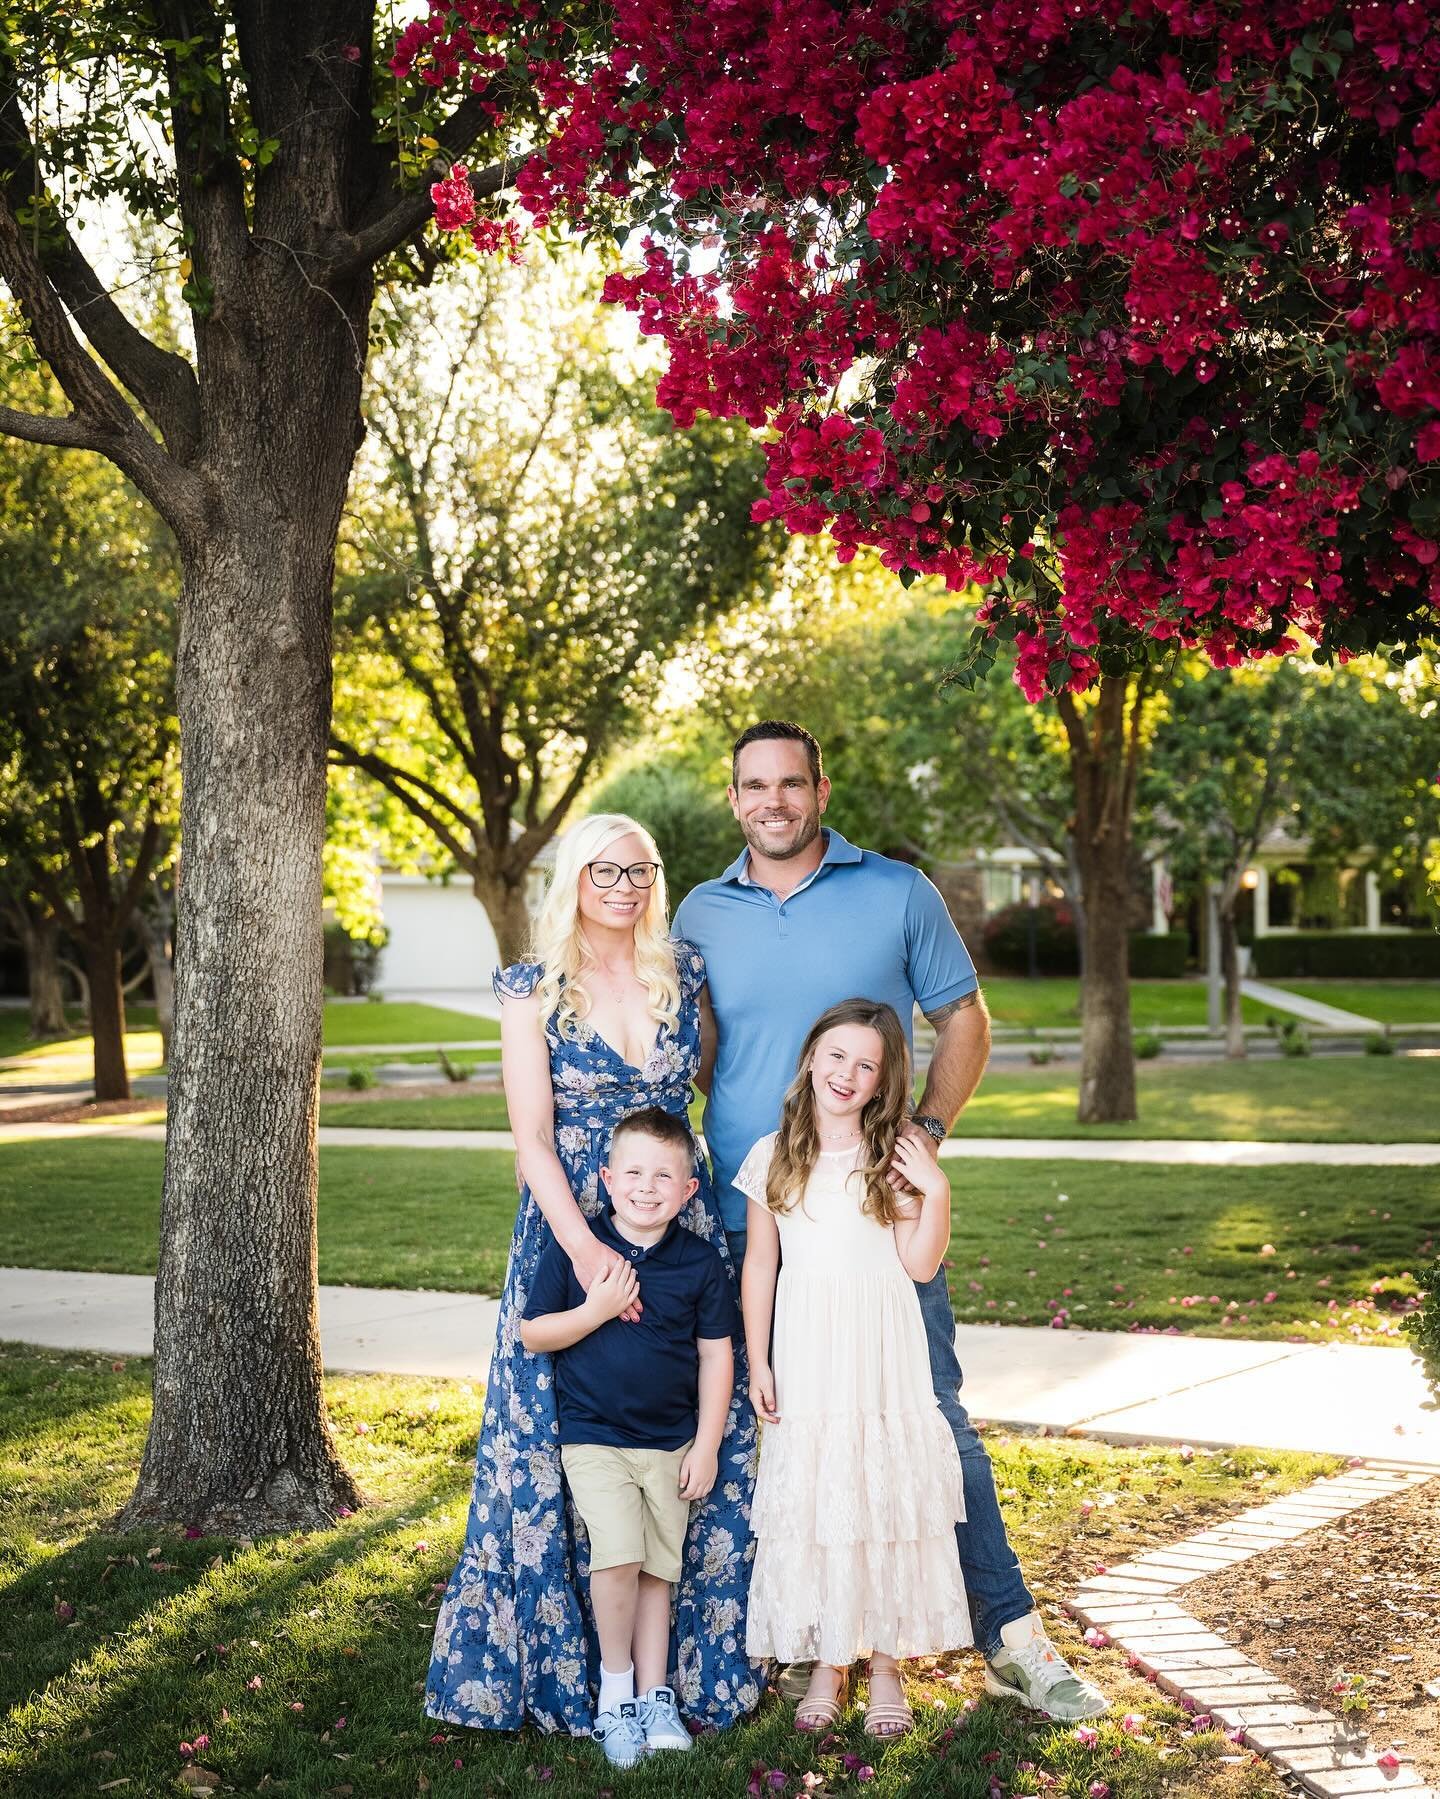 Sneak peek of the Fromm Family! 🌸

Second year photographing their beautiful faces. Ashley once again killed it in the wardrobe department and the kids are just soooo good at taking pictures. So thankful! 🙏

I had a whole post talking about how I h